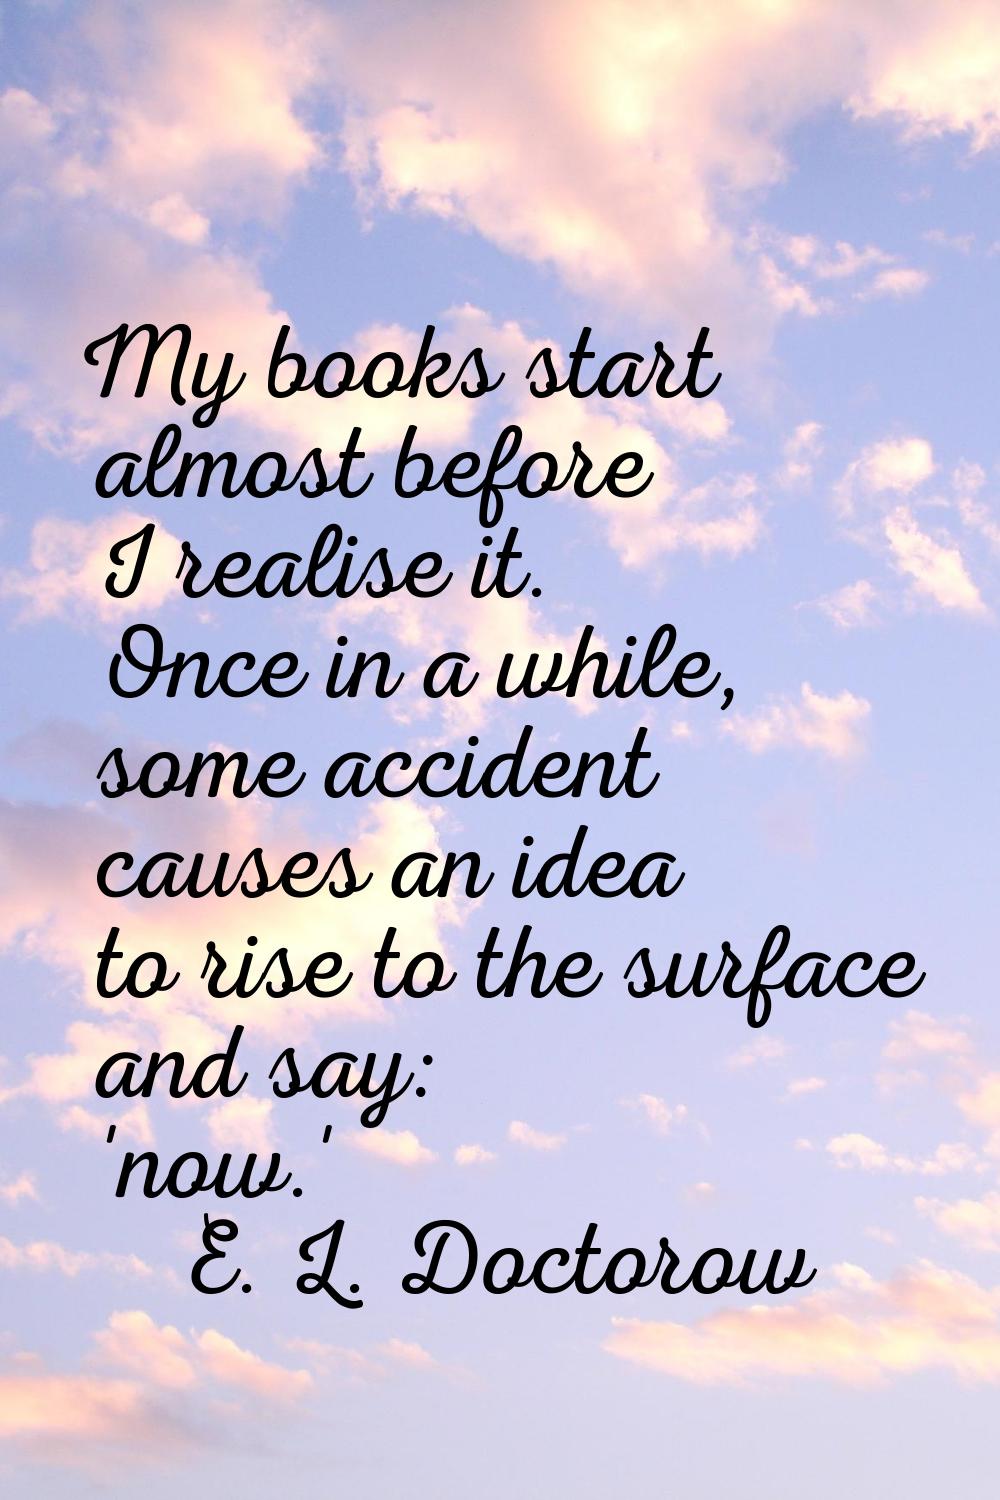 My books start almost before I realise it. Once in a while, some accident causes an idea to rise to